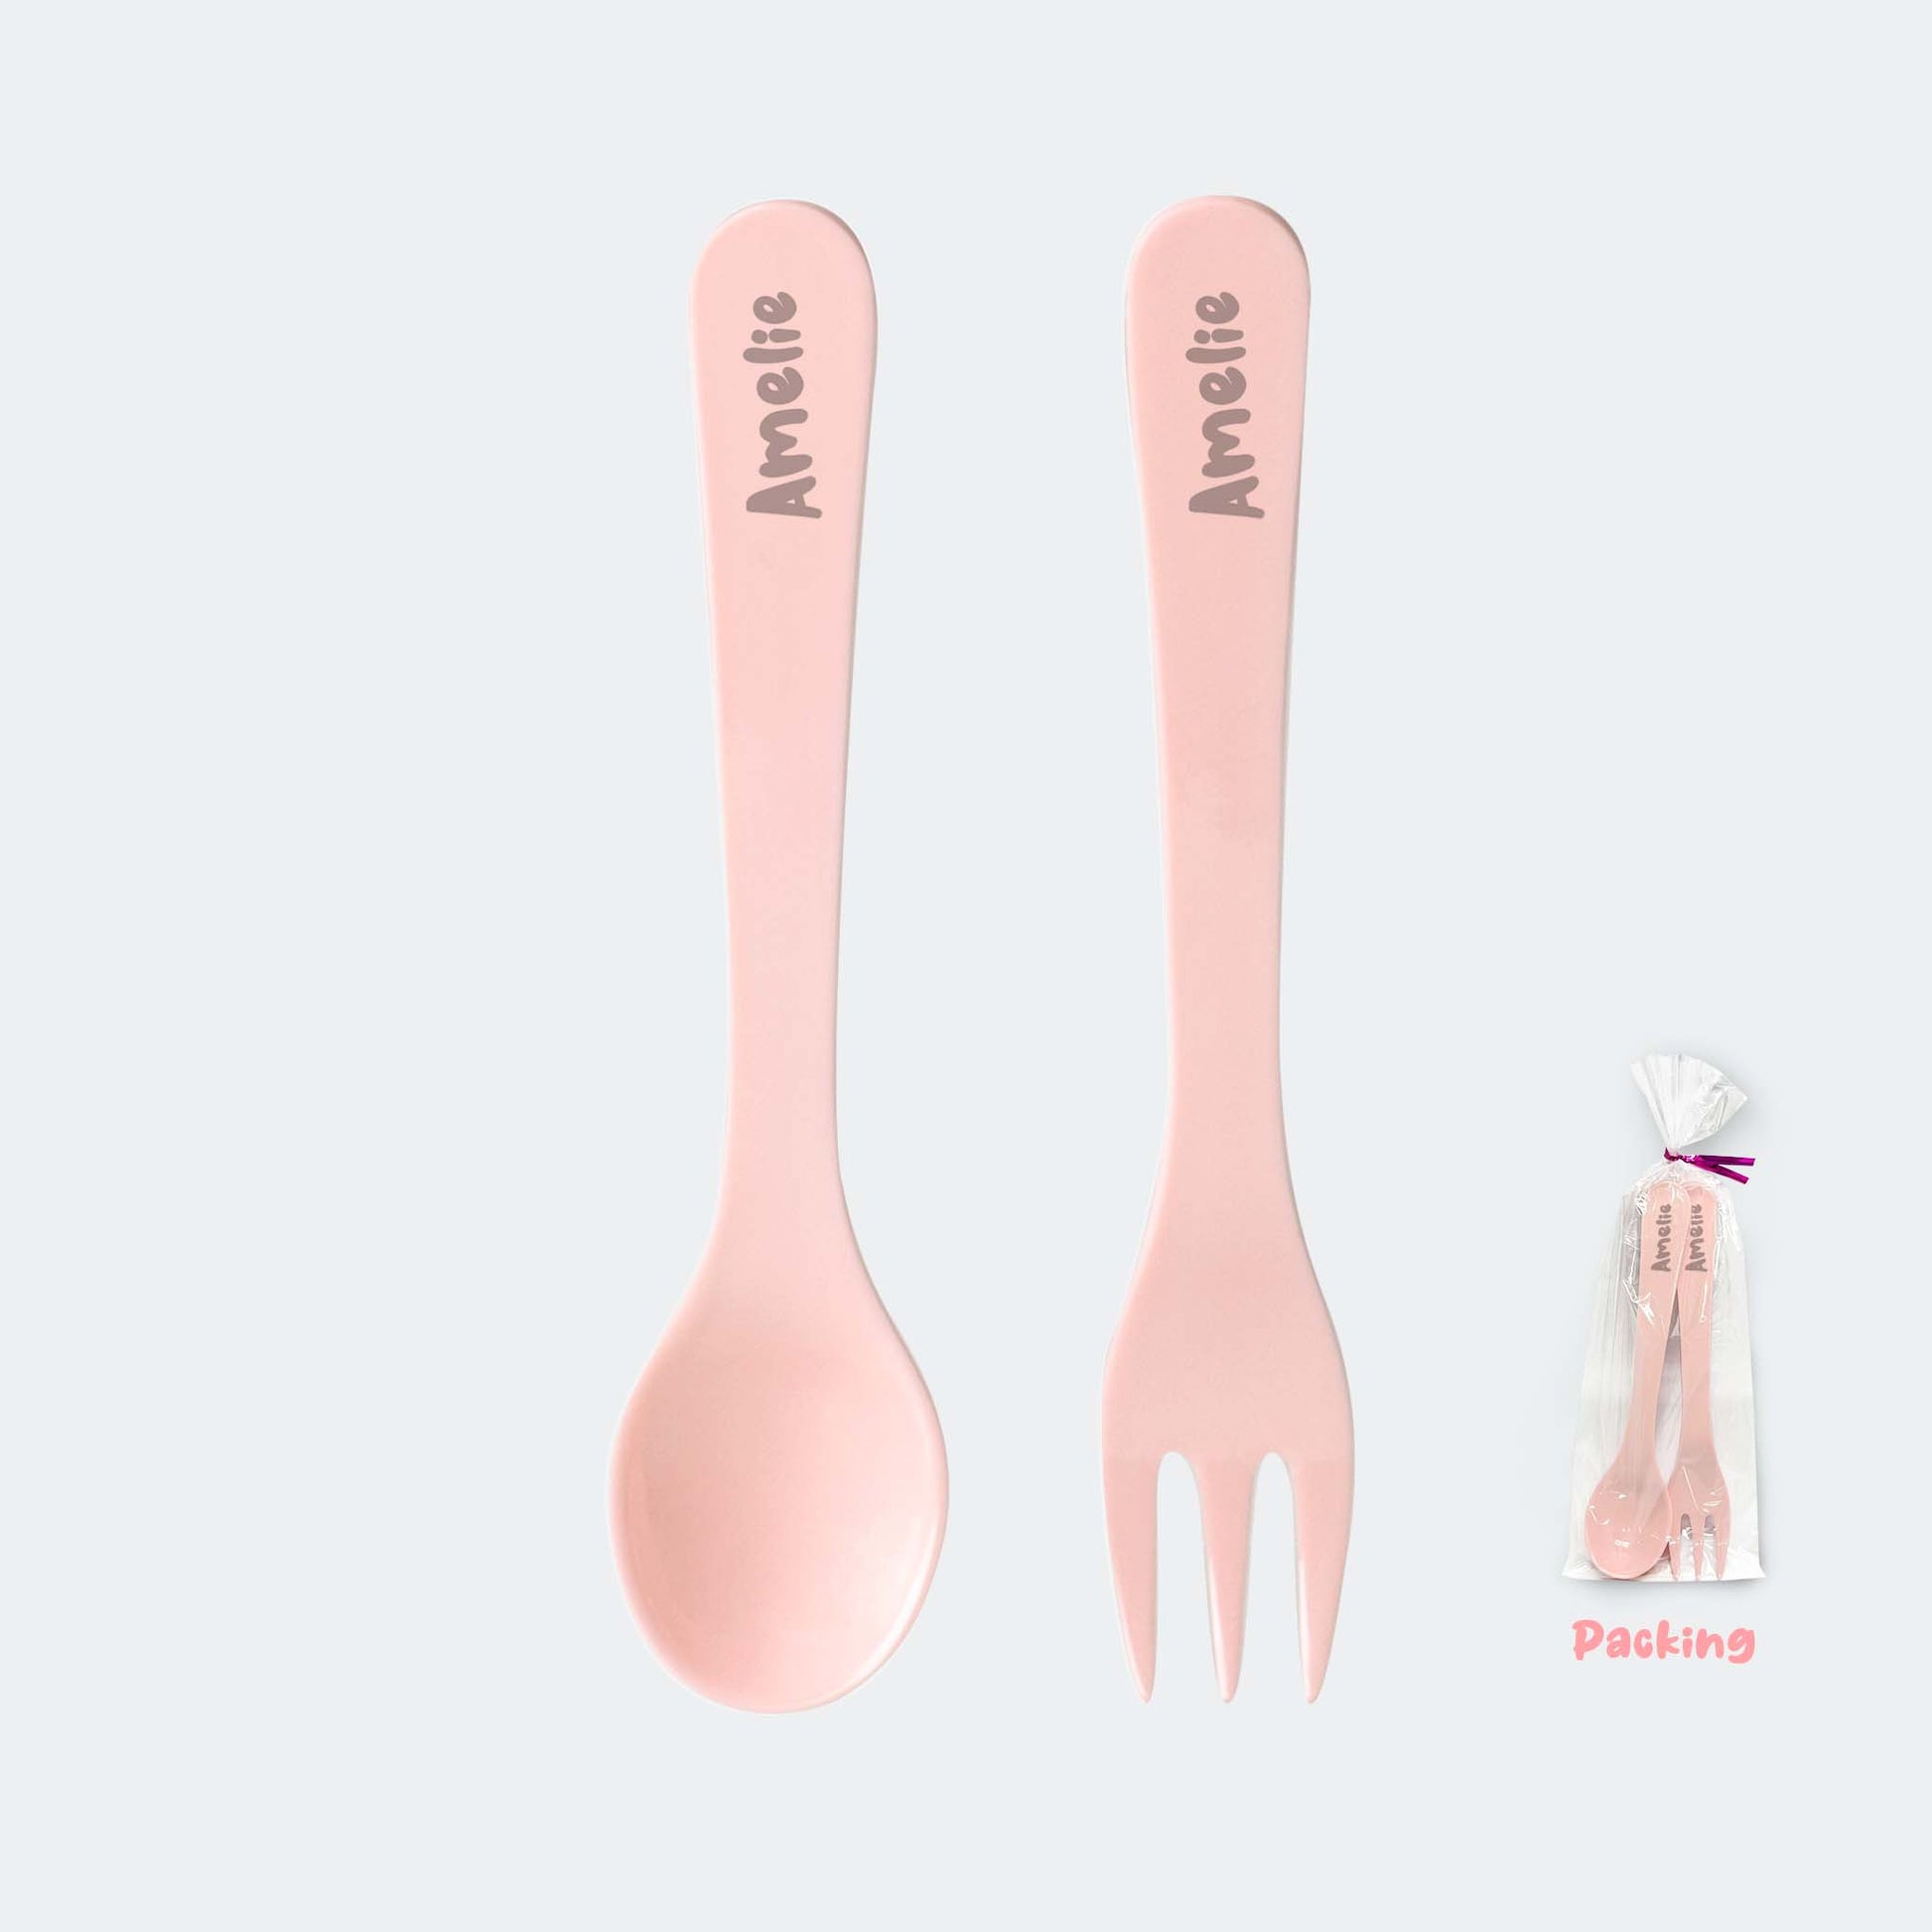 The Plate Story Pink 2 Pcs Personalised Cutlery Set